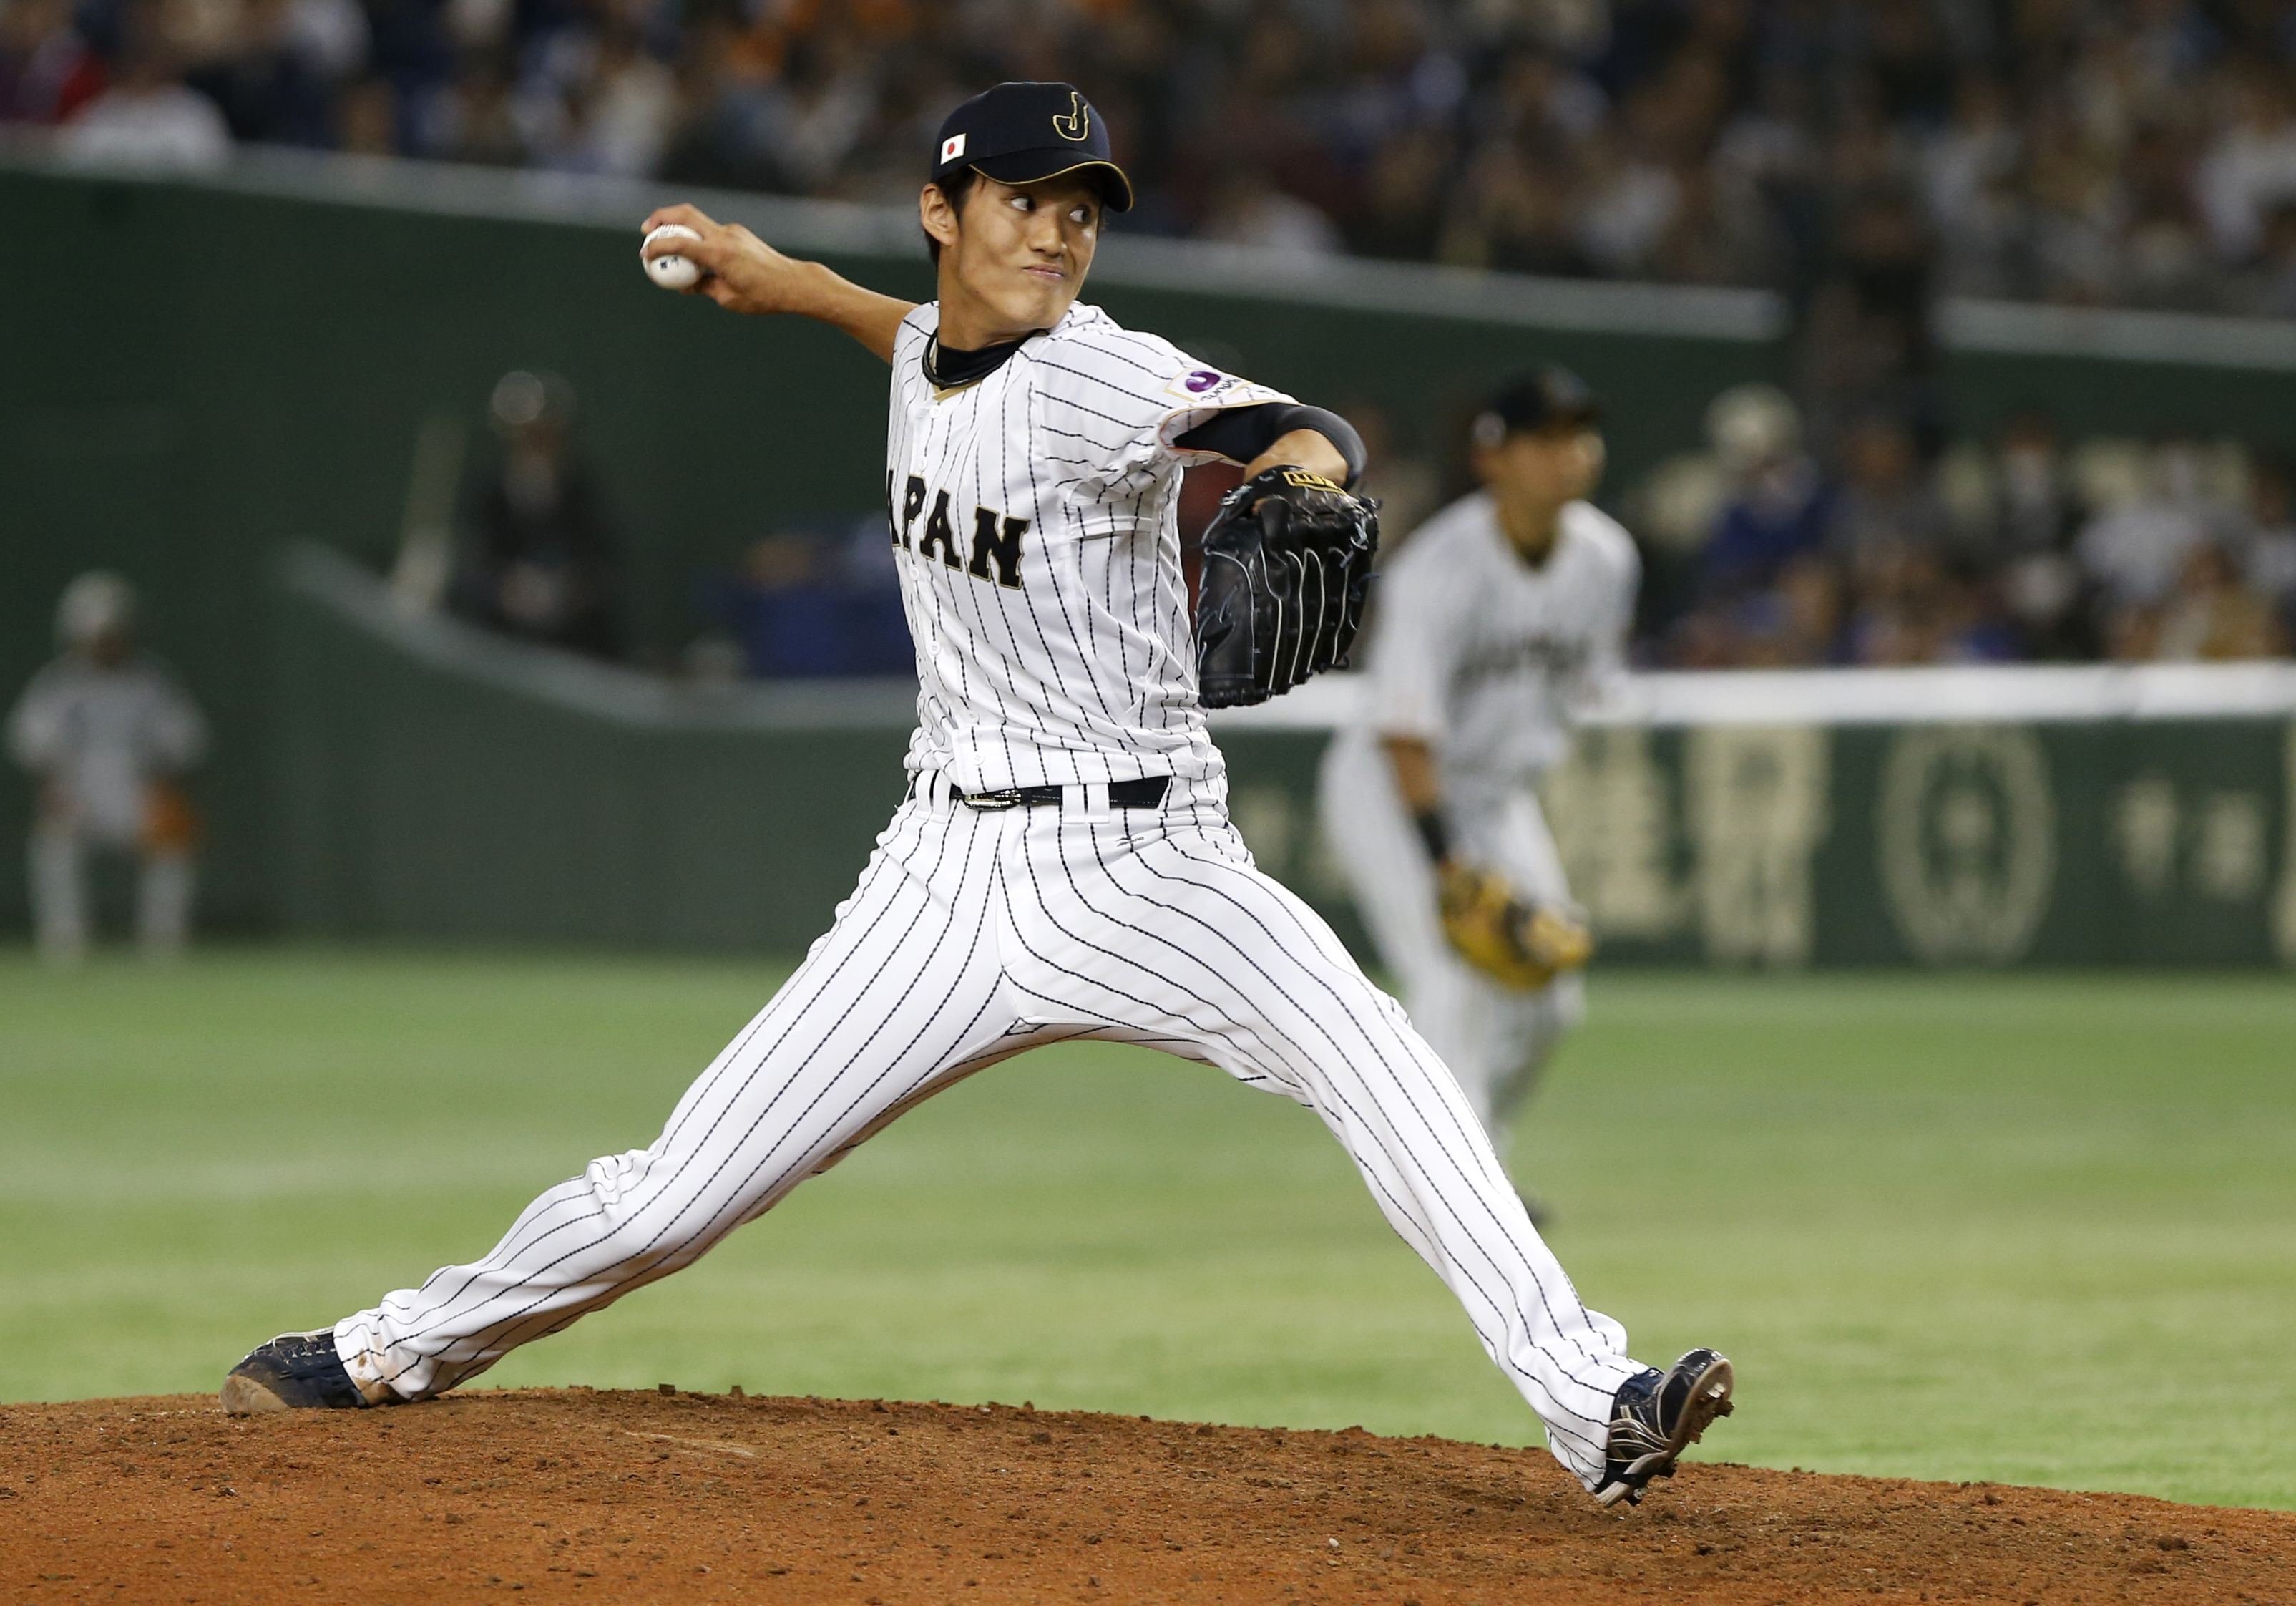 Should Red Sox overlook glaring issues with pitcher Shintaro Fujinami?